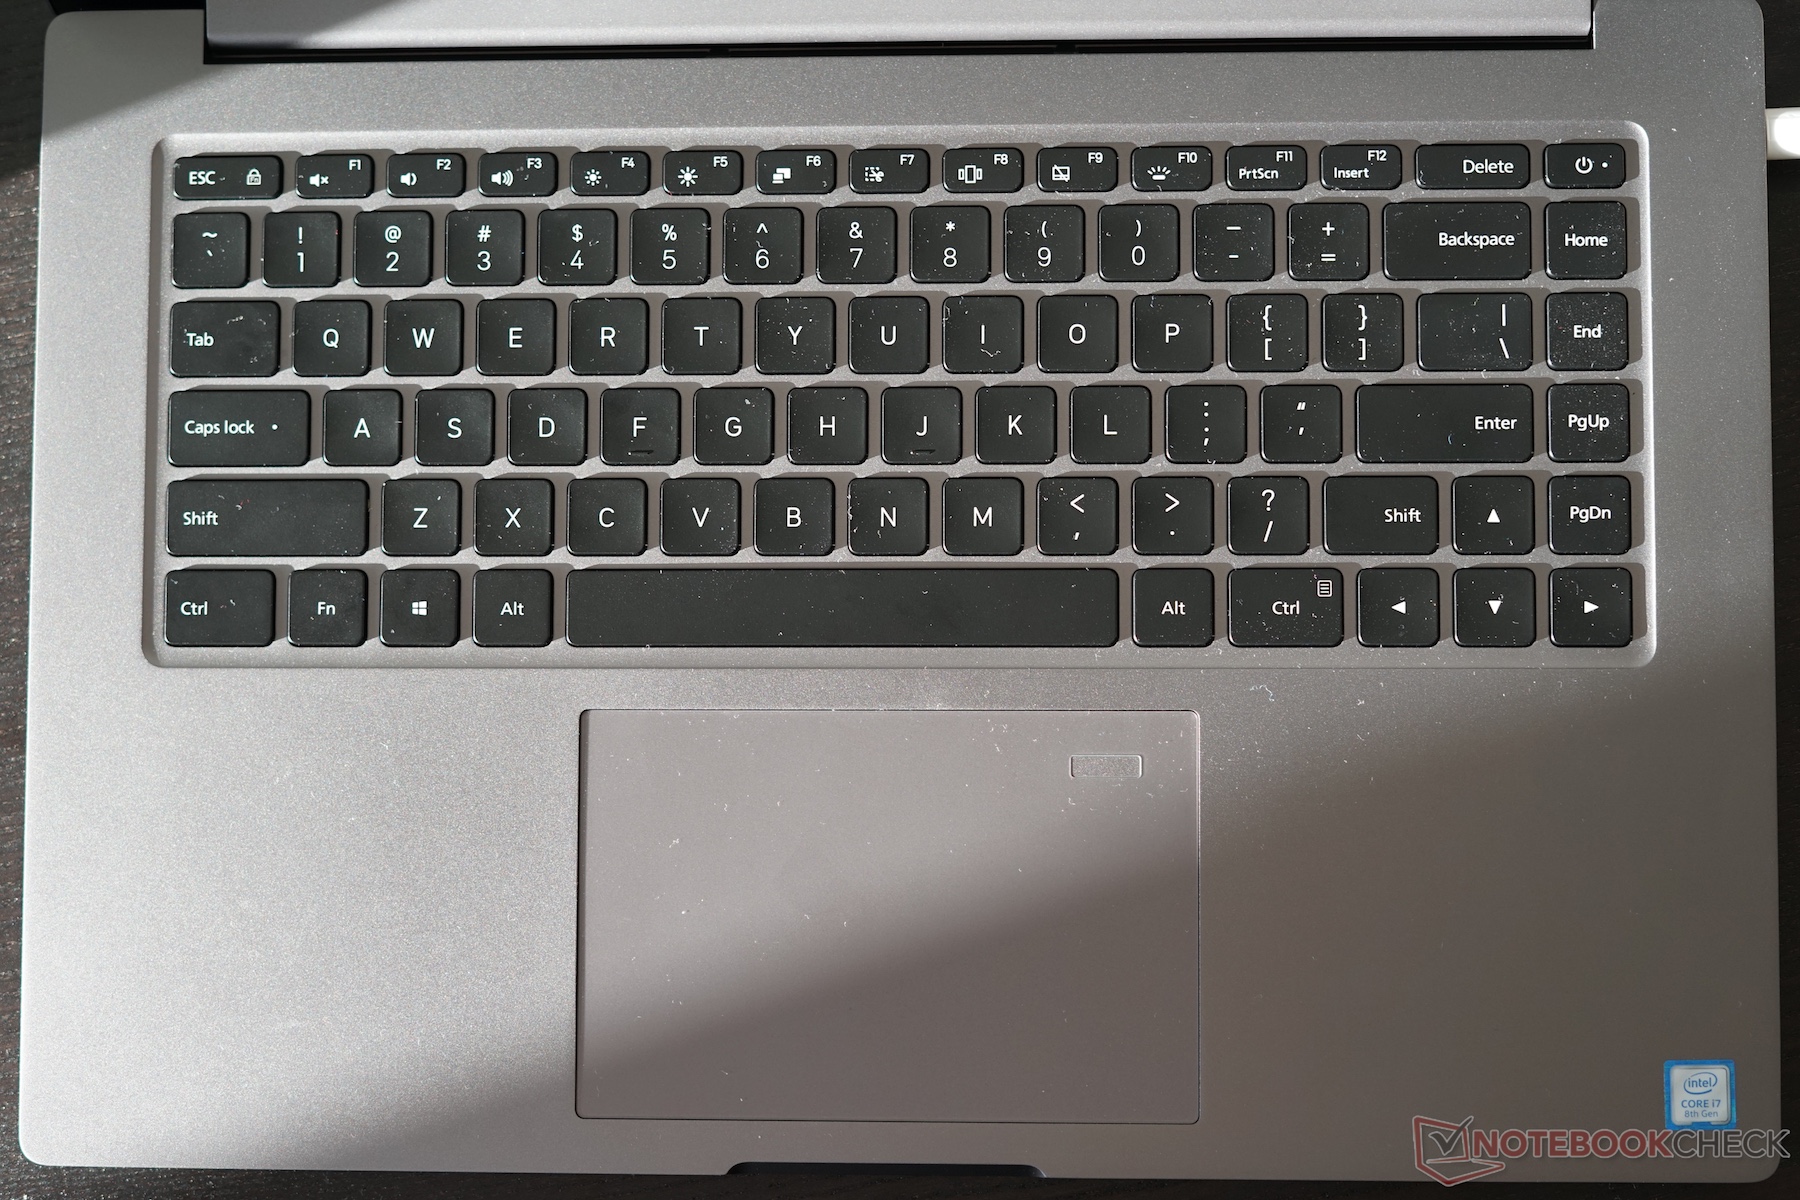 Xiaomi's Mi Notebook Pro has a lot going for it, but one